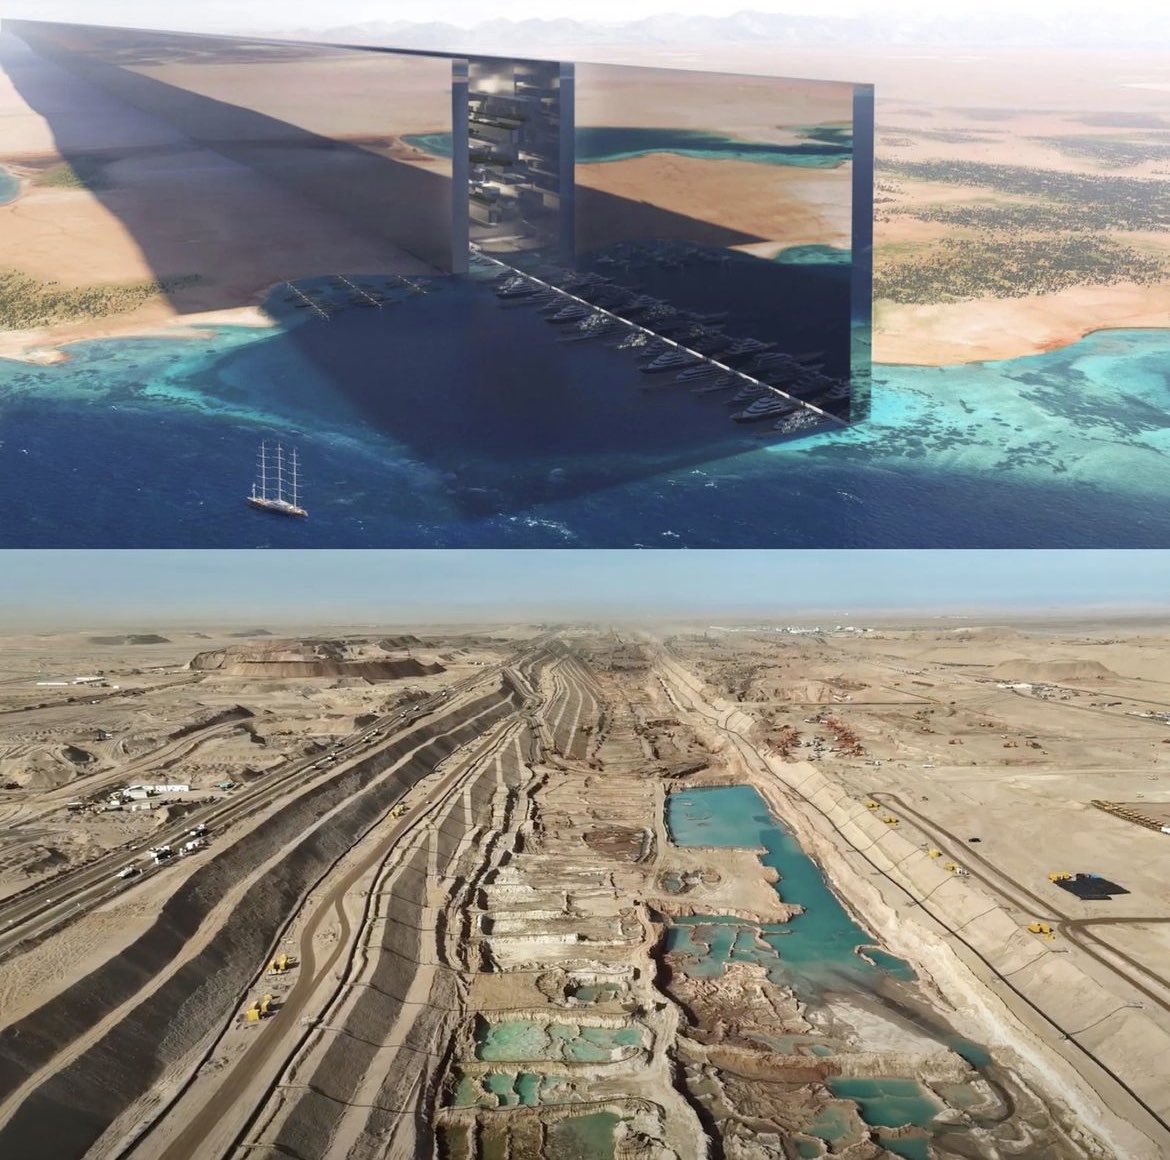 Latest construction photos of the Line / Neom

Those are going to need to be some hefty foundations if this ends up being 500m tall!!!